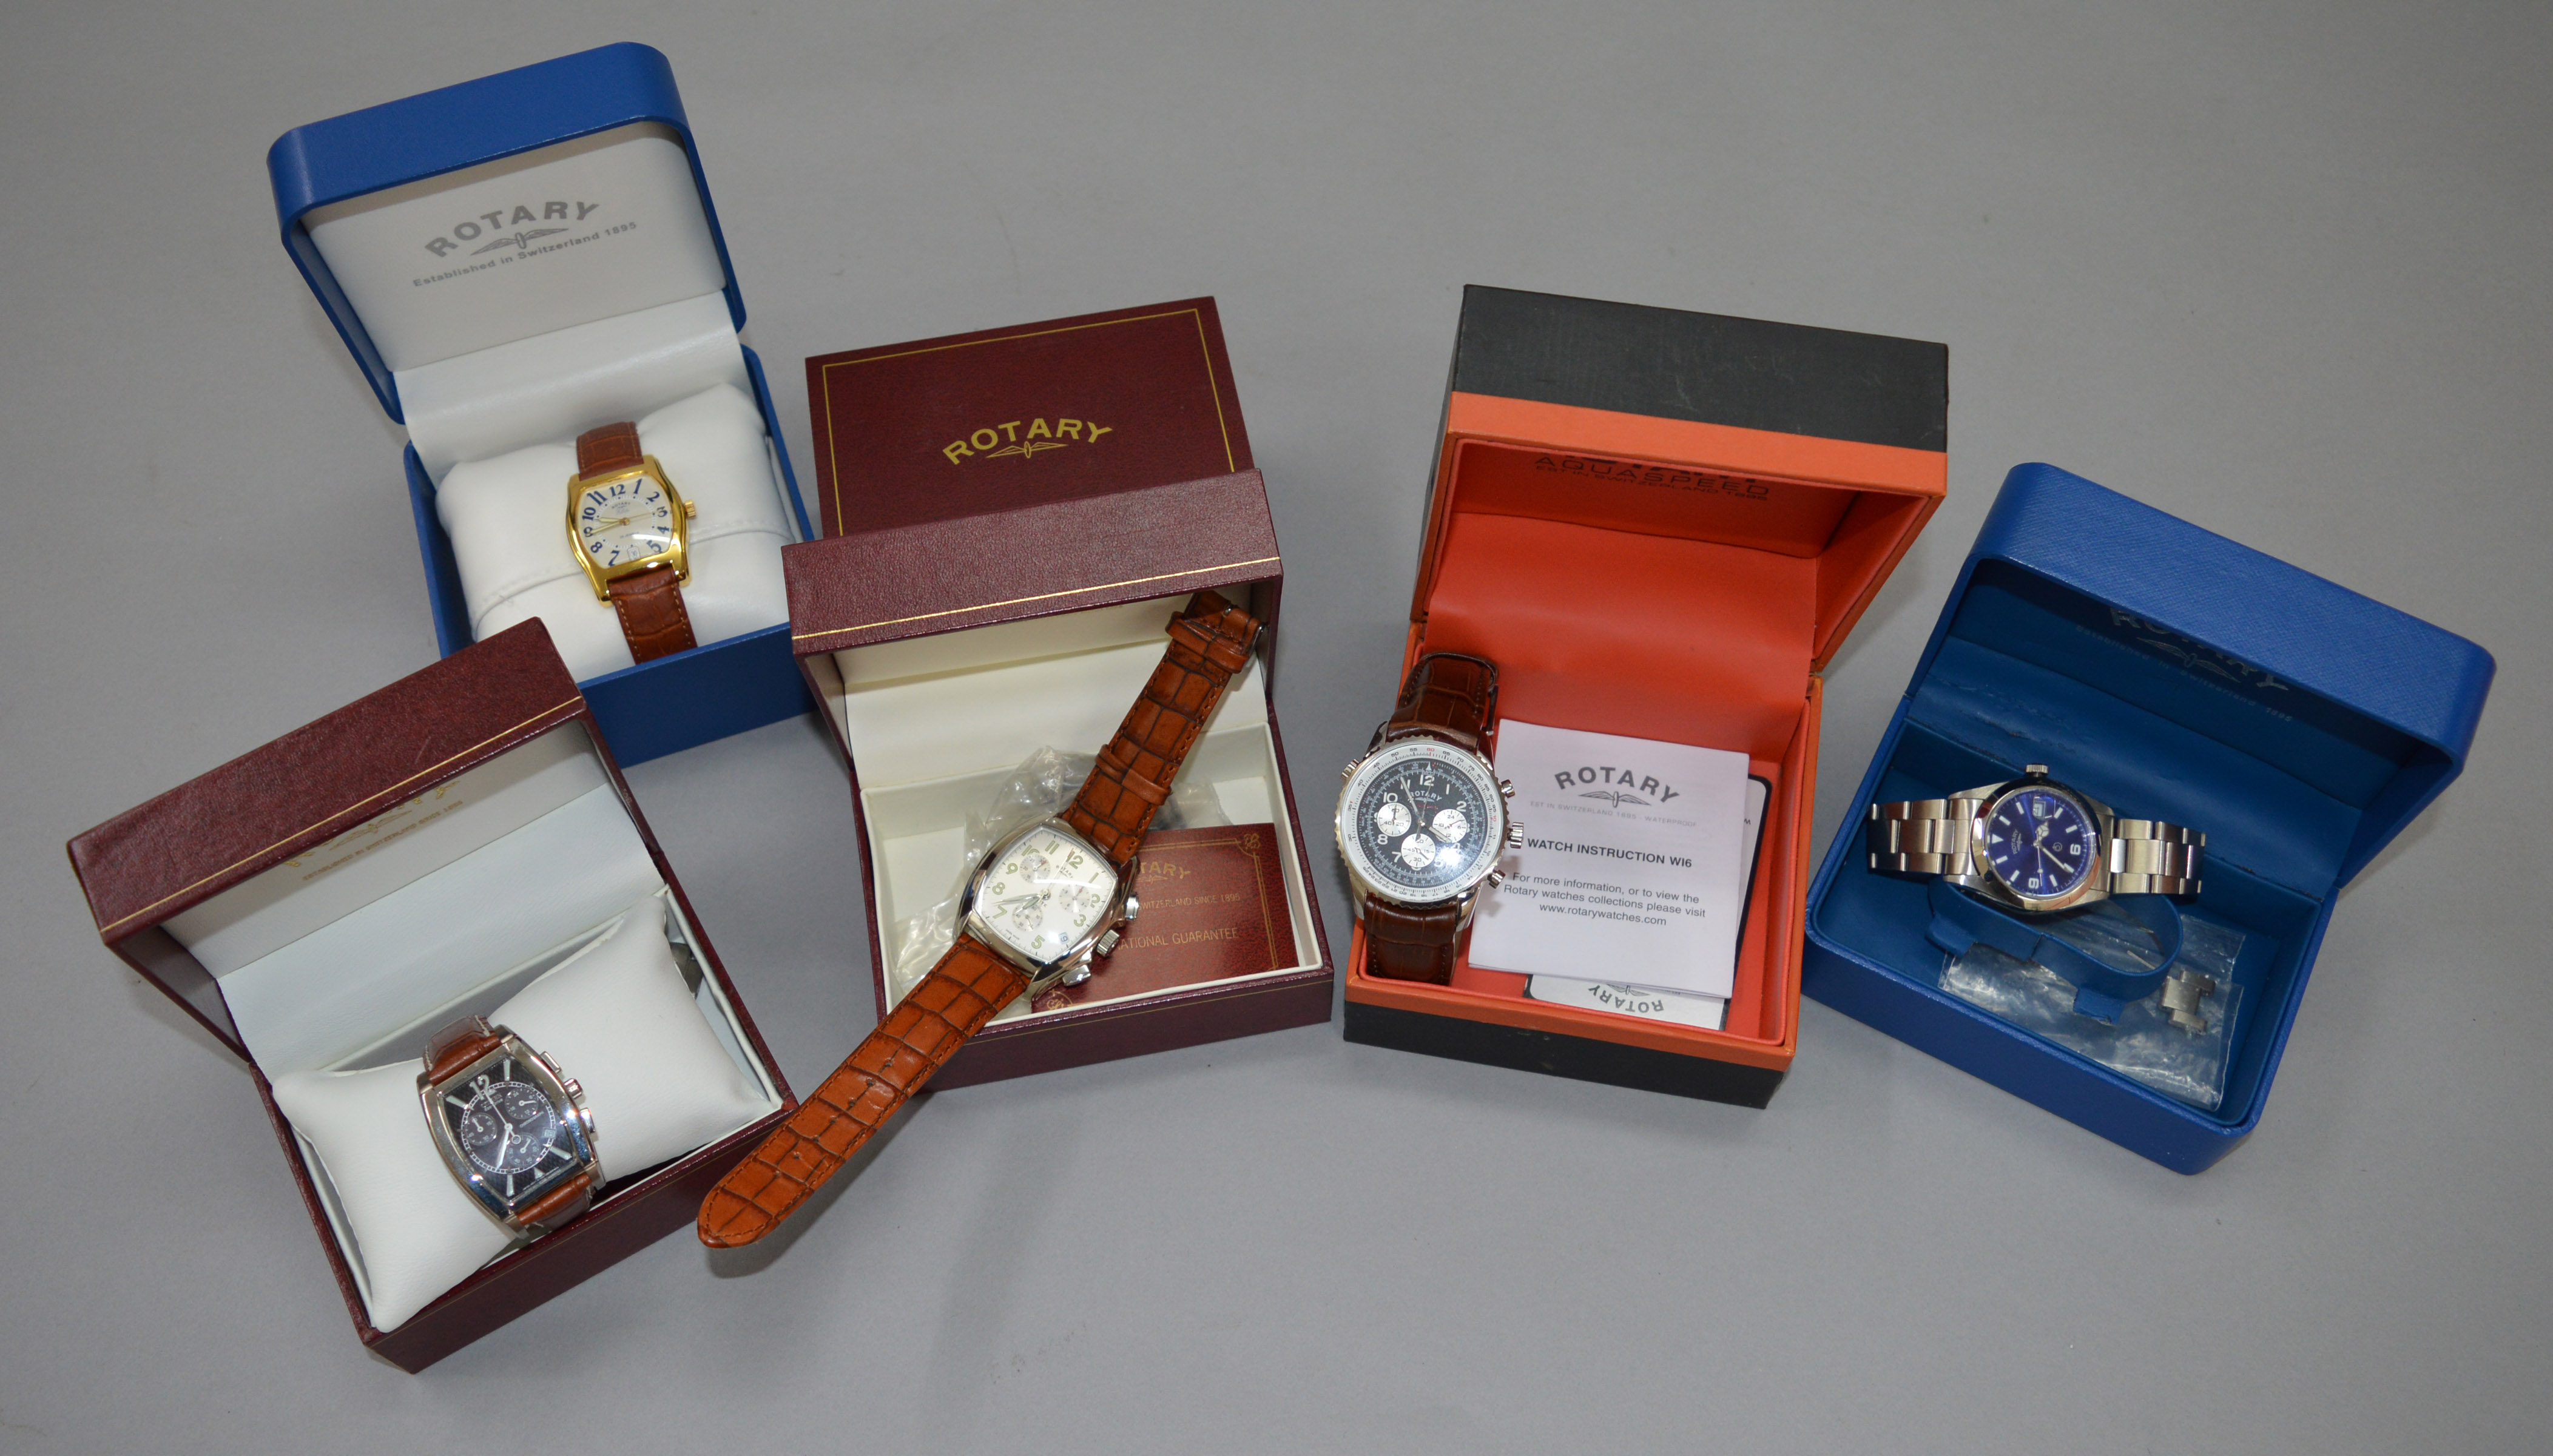 5 Rotary watches including Aquaspeed and Elite examples, with boxes.